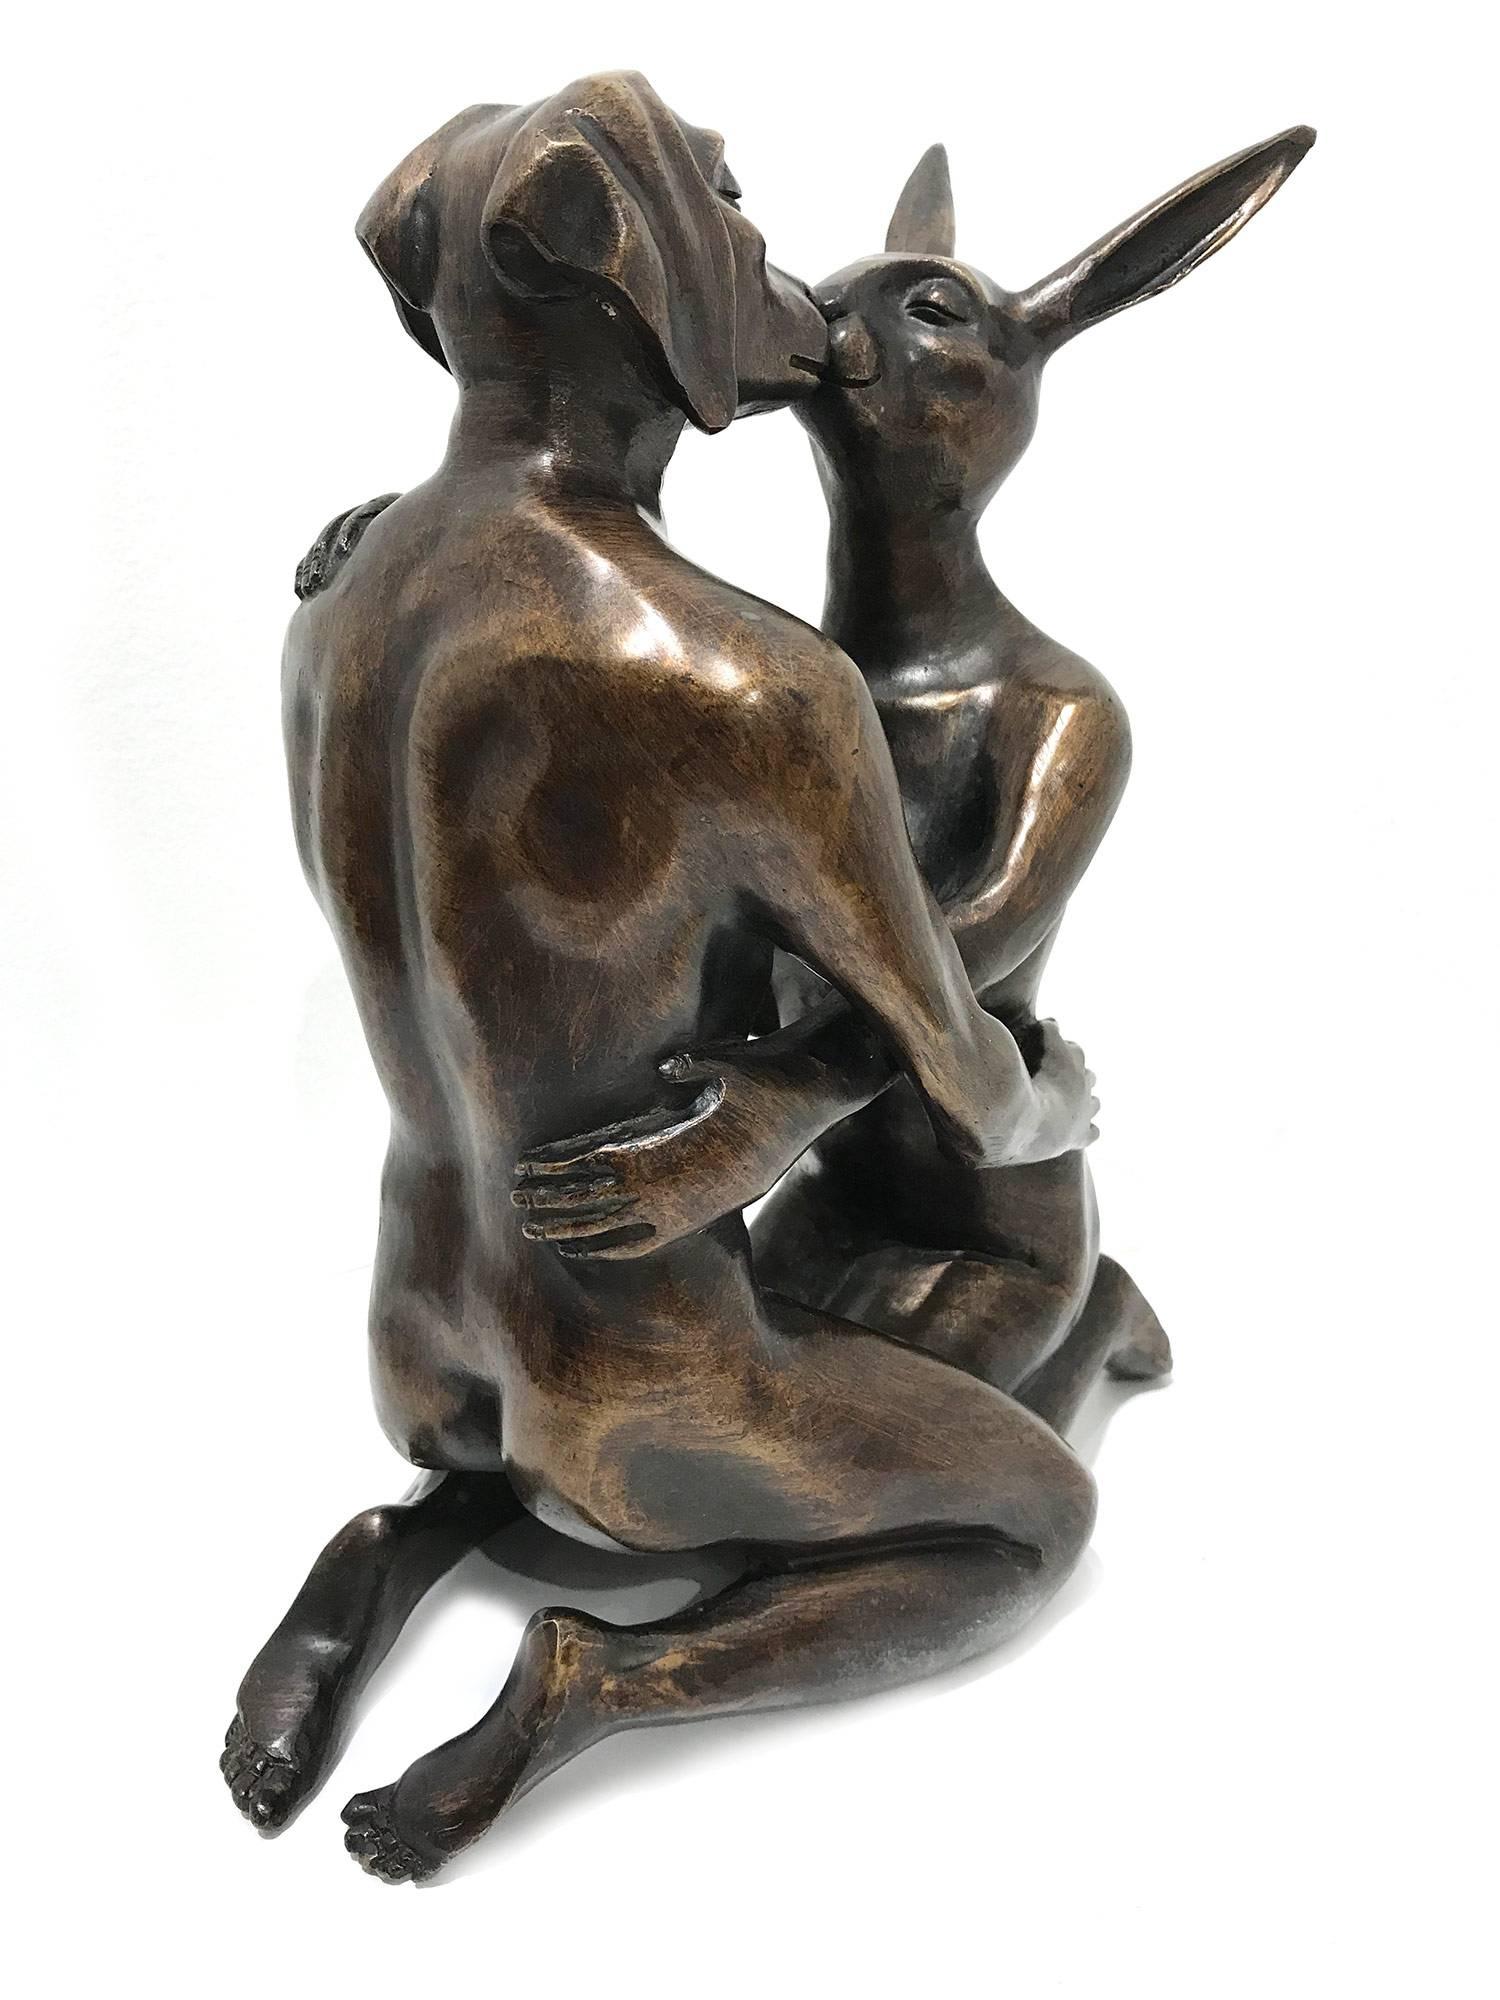 She Kissed Him Like It Was for the First Time - Pop Art Sculpture by Gillie and Marc Schattner